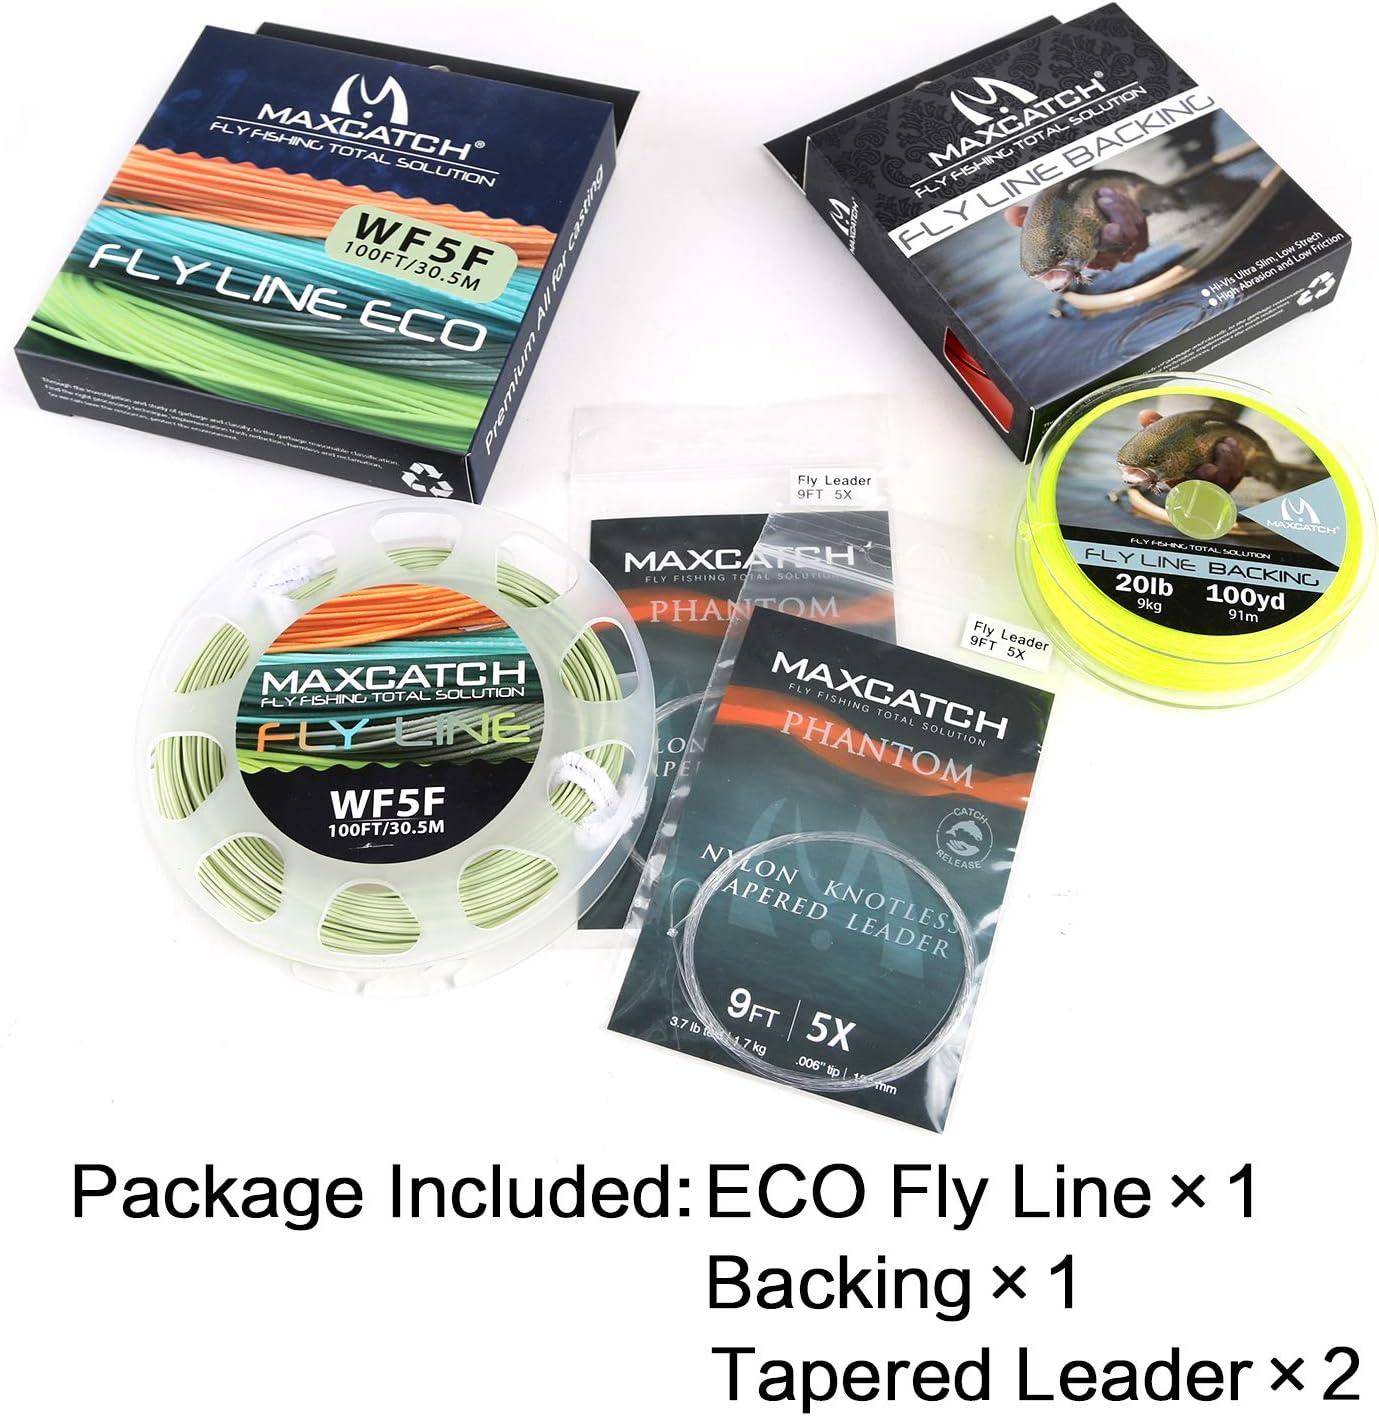 Maxcatch ECO Floating Fly Fishing Line Weight Forward Design with Welded  Loop (3F,4F,5F,6F,7F,8F) Line Combo-Moss Green WF3F-100FT